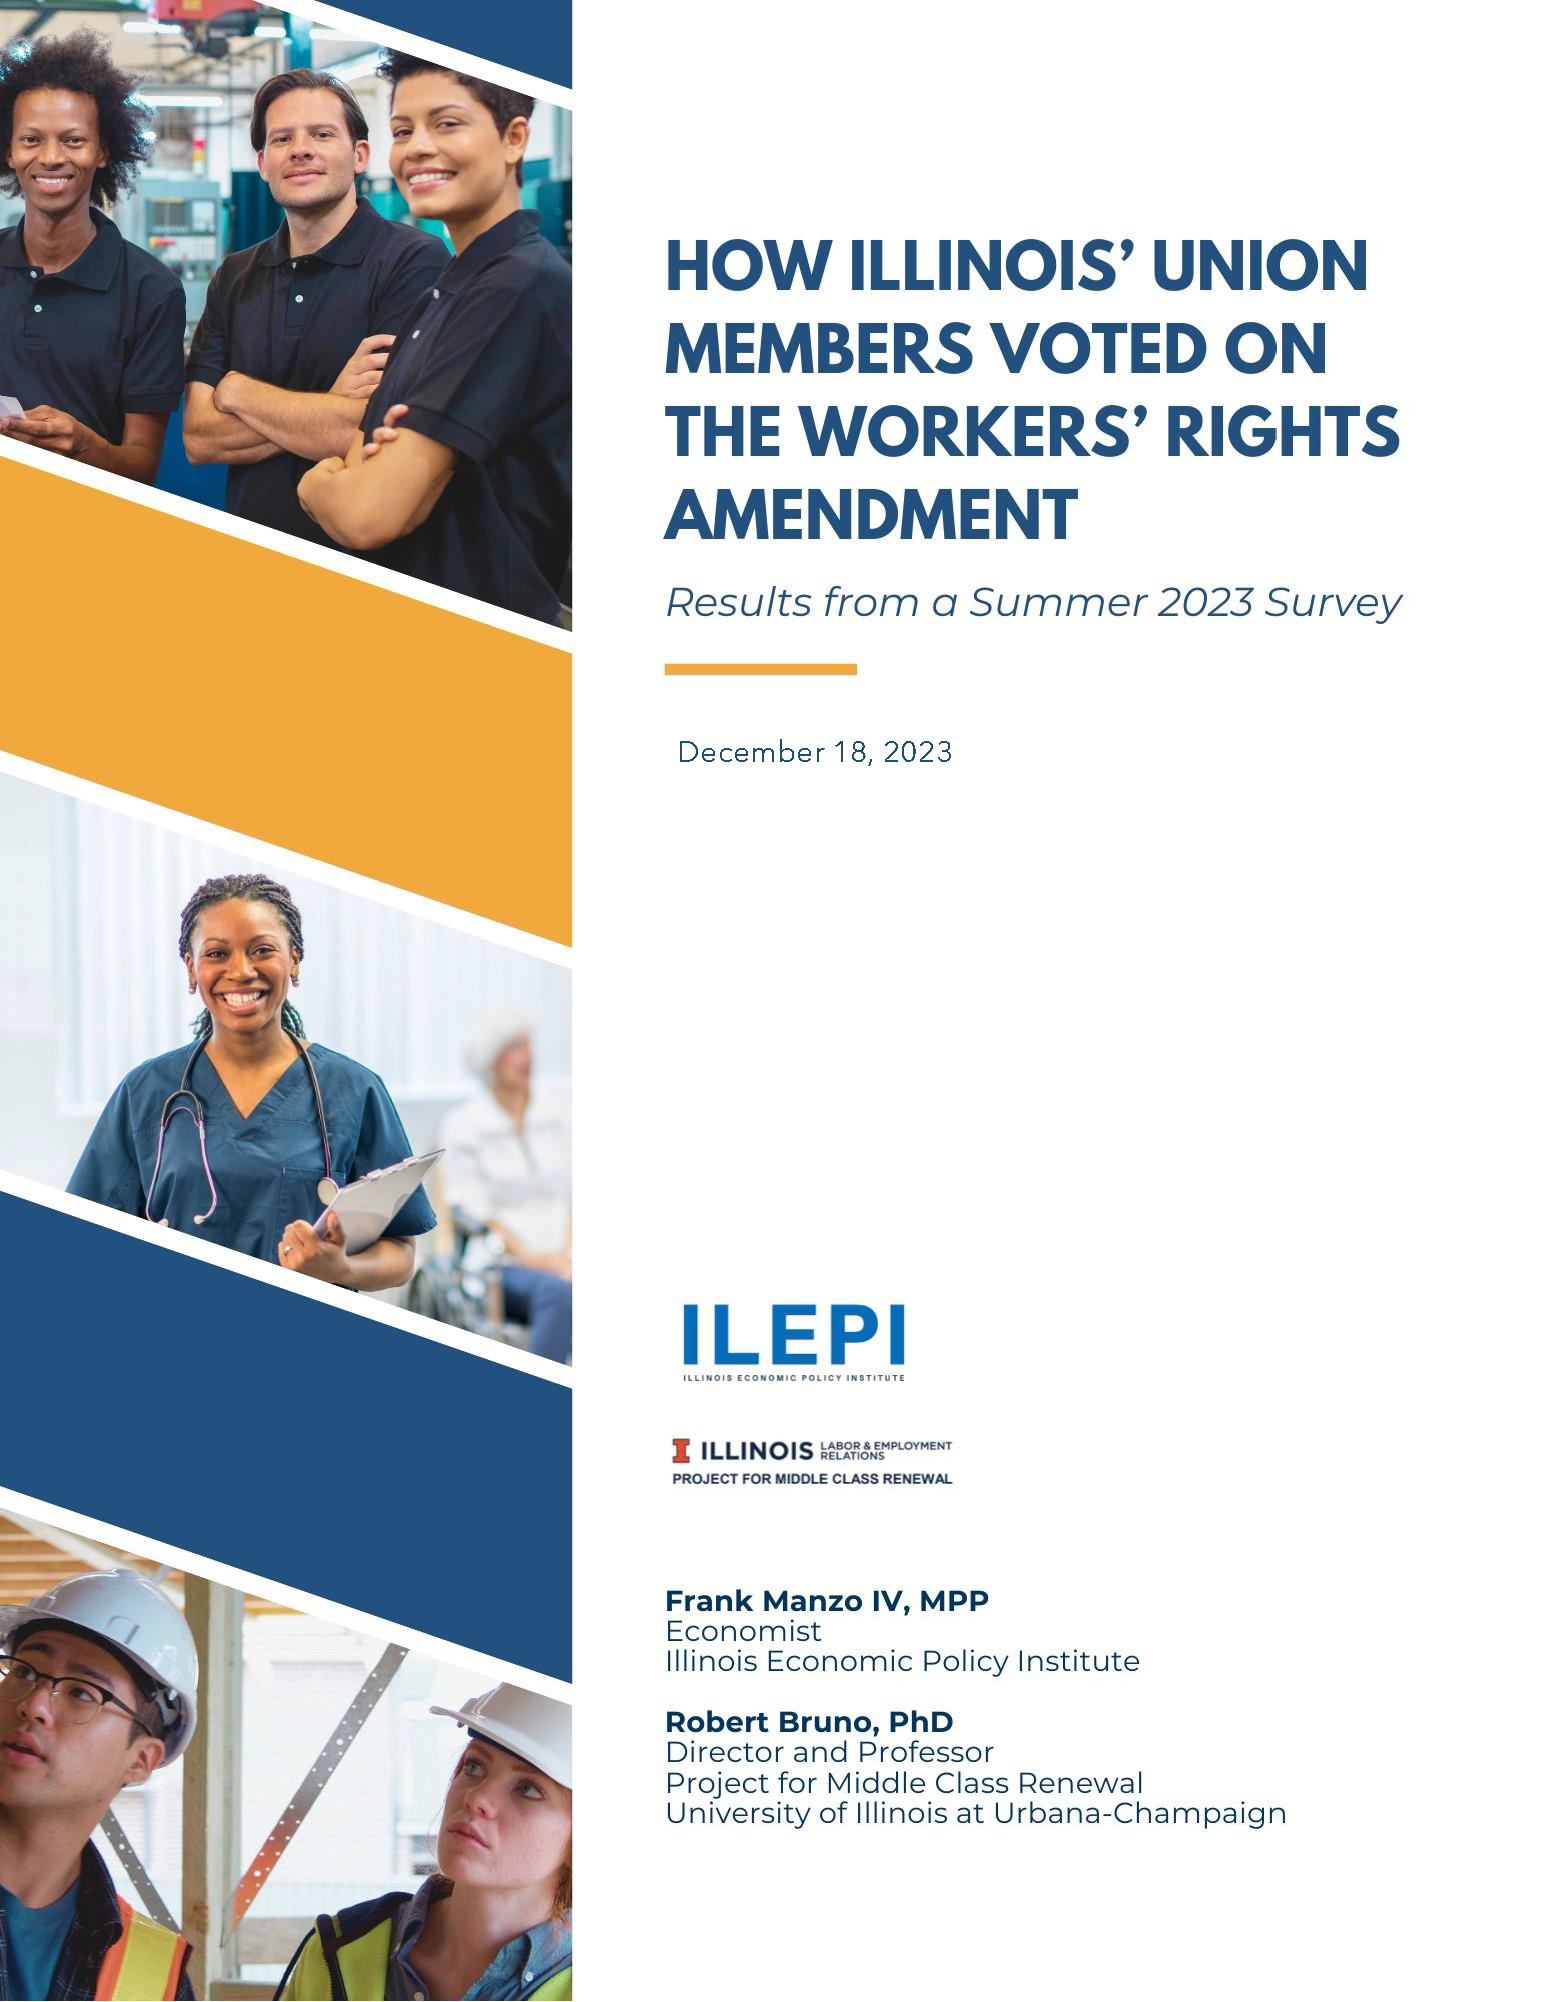 HOW ILLINOIS’ UNION MEMBERS VOTED ON THE WORKERS’ RIGHTS AMENDMENT | Results from a Summer 2023 Survey